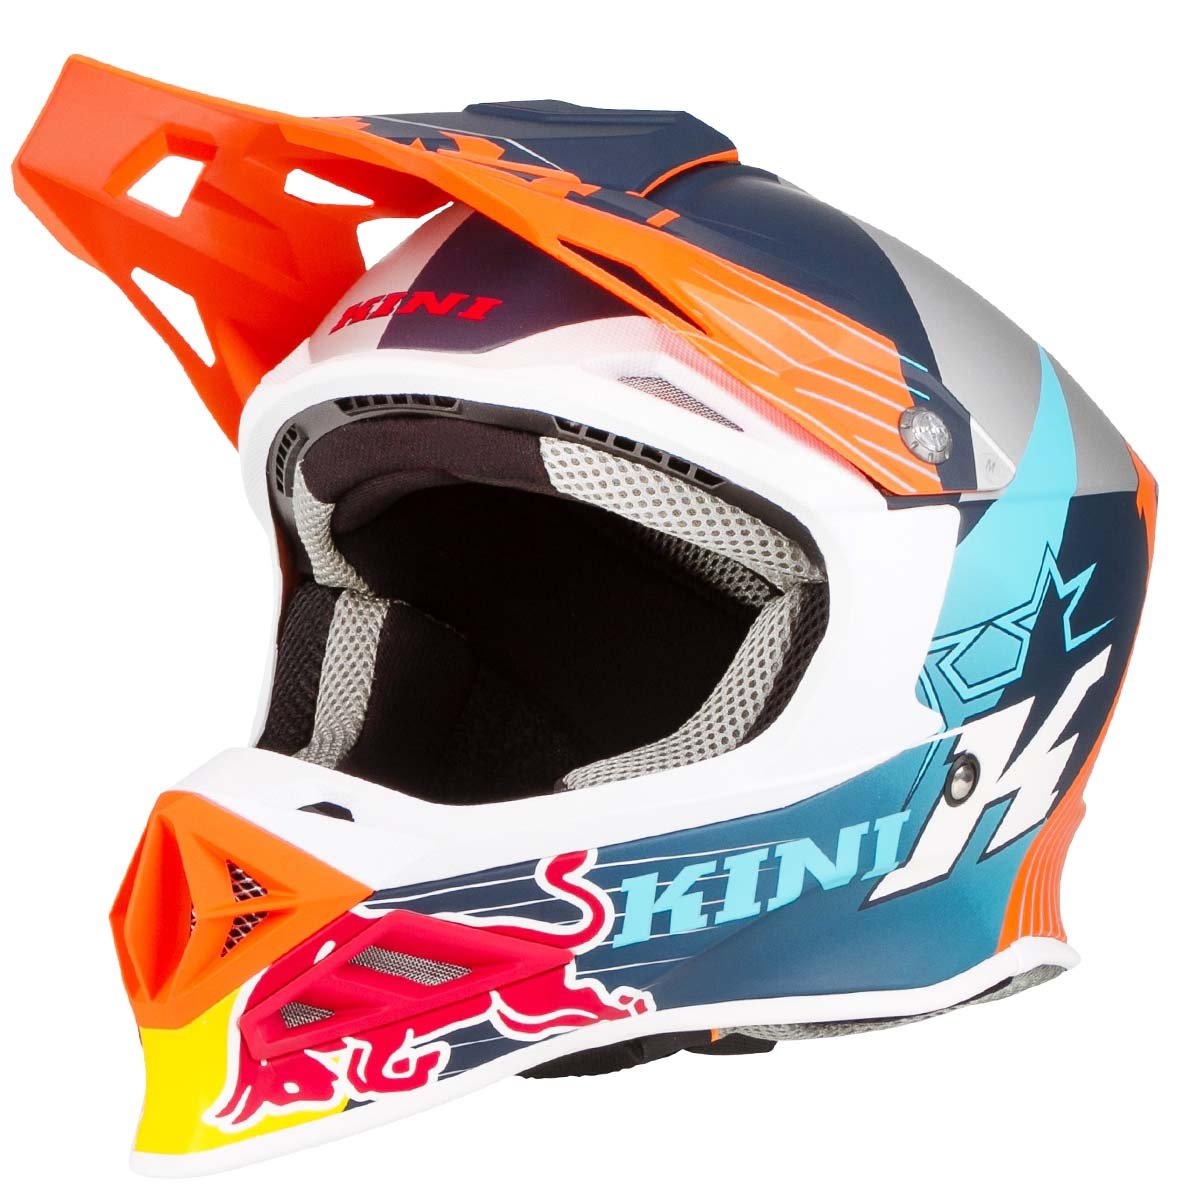 Kini Red Bull Helm Competition Orange/Weiß/Navy